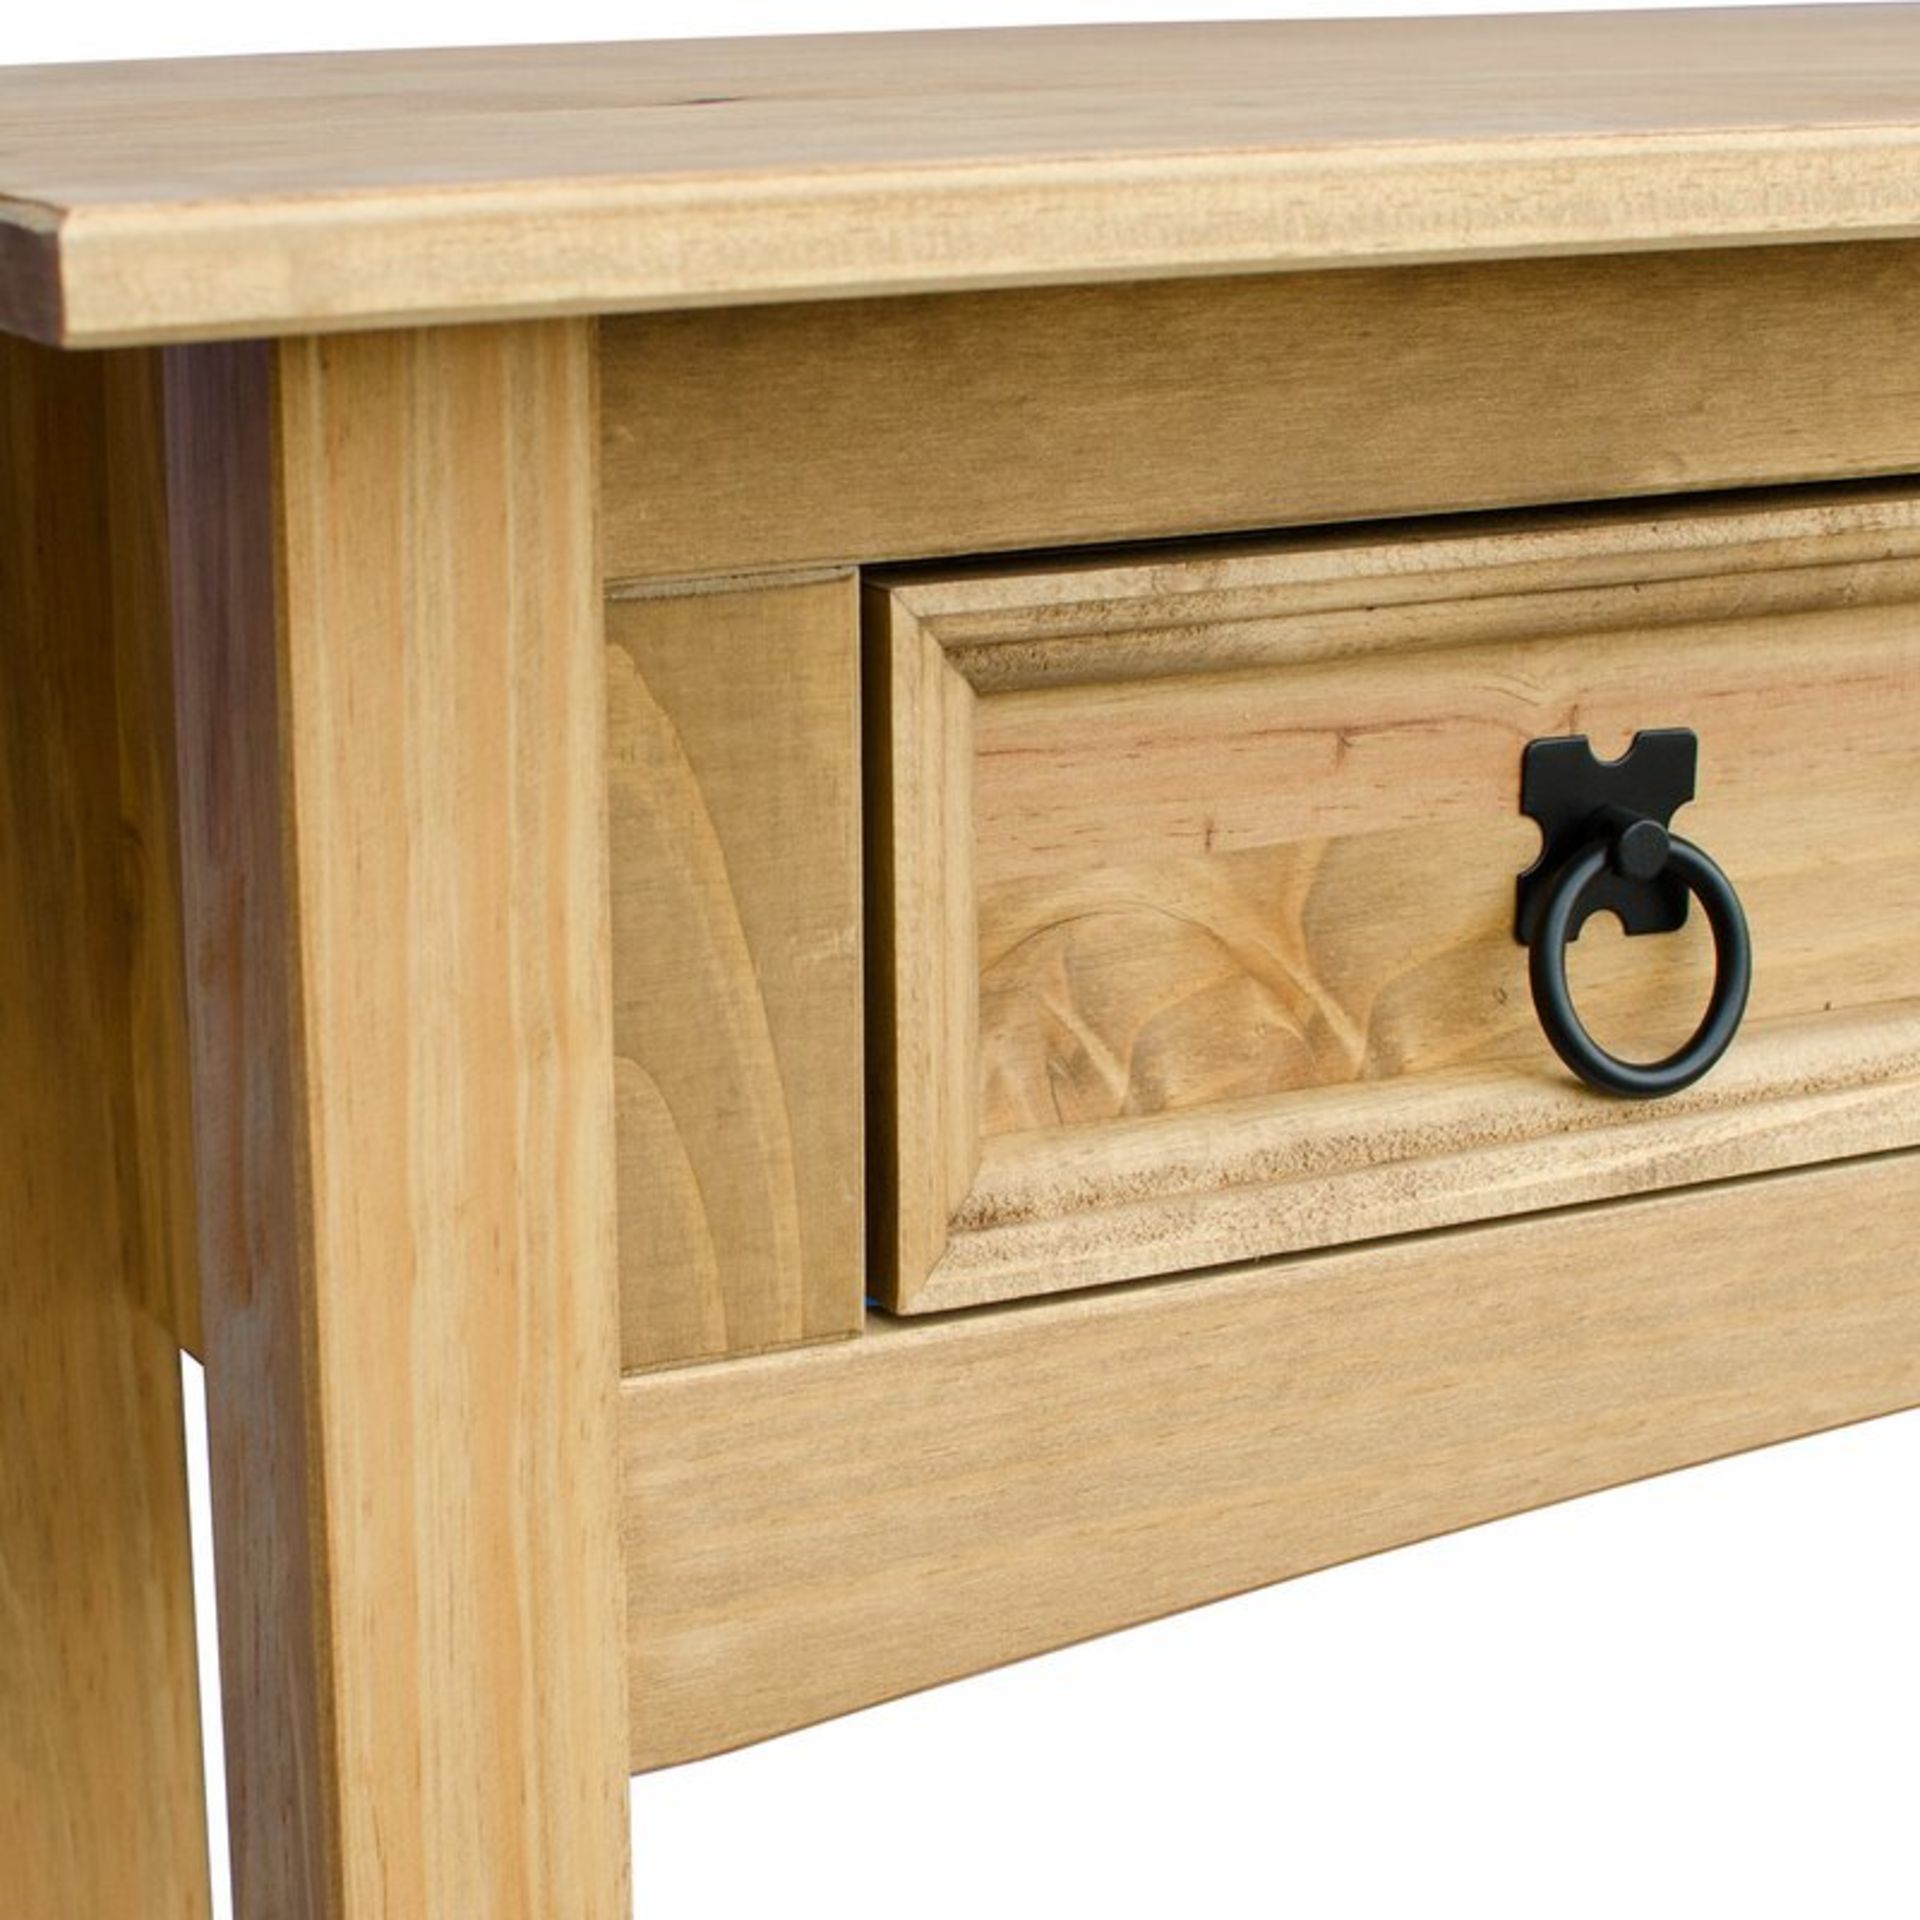 Dodge 83Cm Solid Wood Console Table - RRP £96.99. - Image 5 of 6